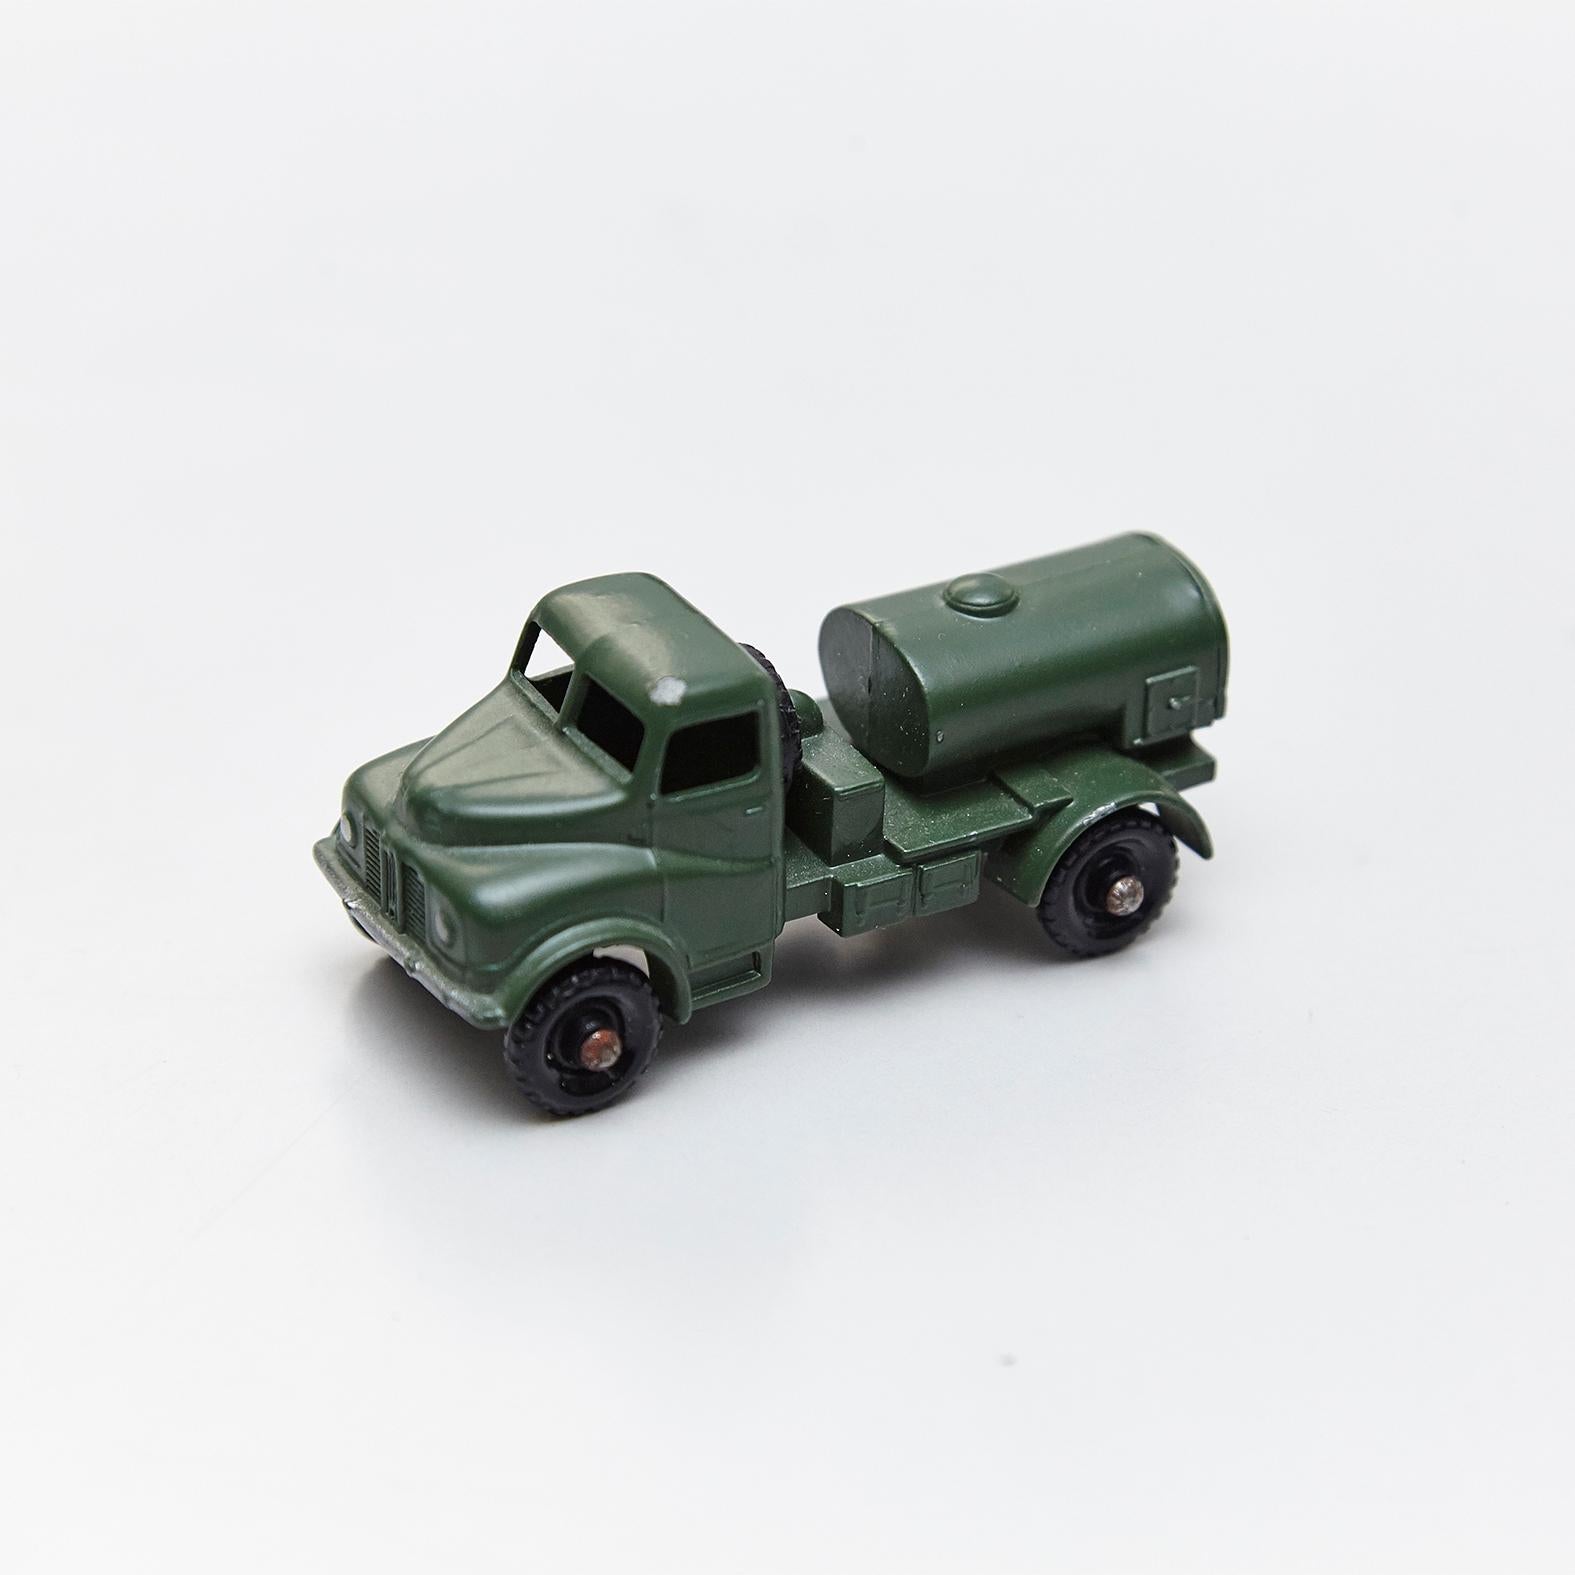 20th Century Lesney Matchboxes Series Antique Metal Toy Cars Green Military, Free Shipping